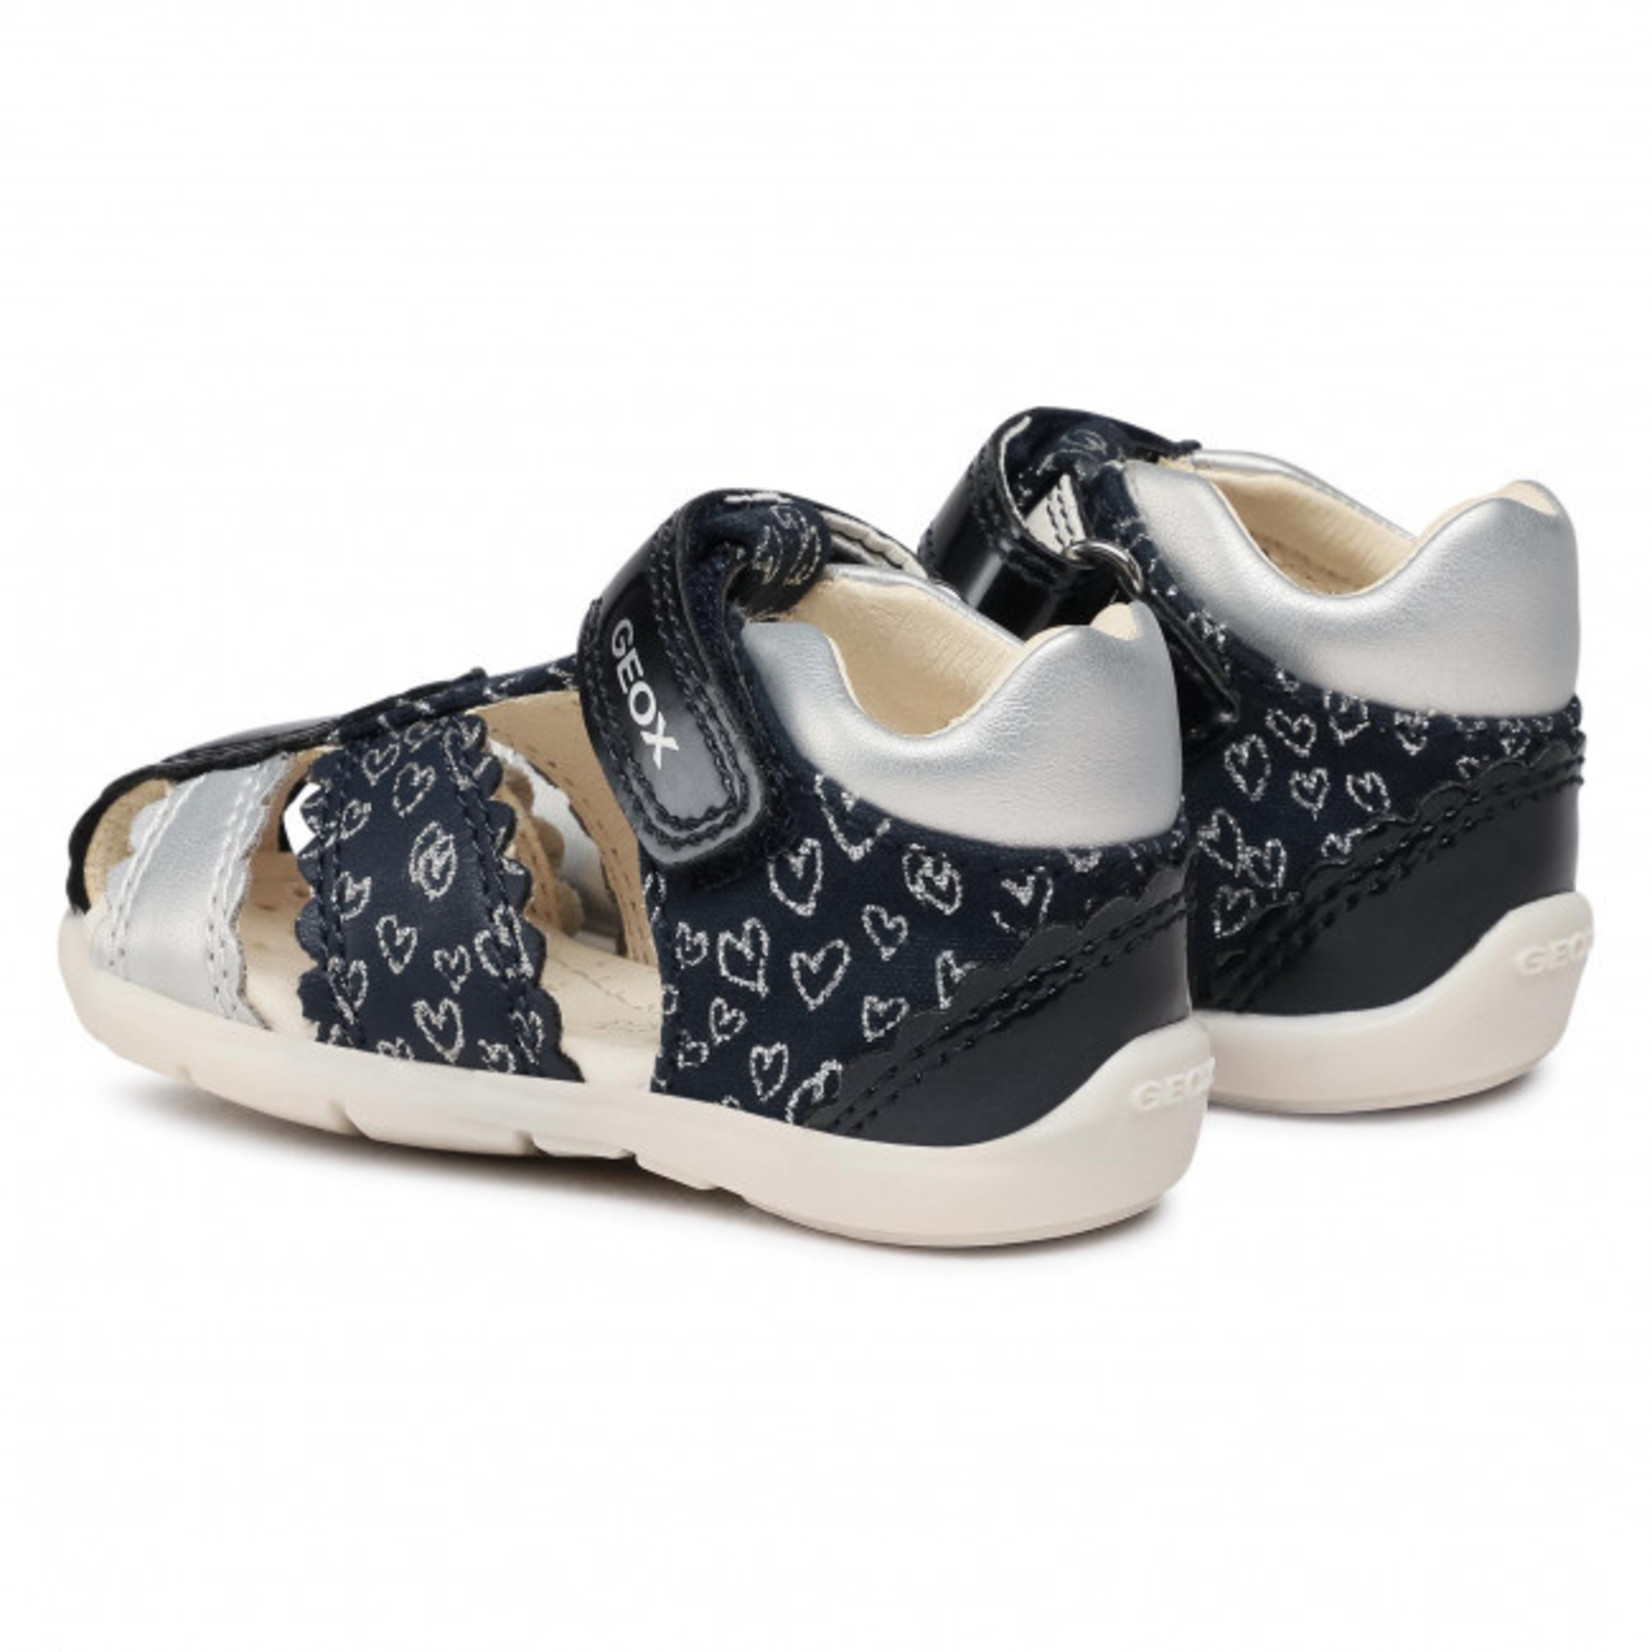 Geox GEOX ELTHAN NAVY/SILVER SANDALS